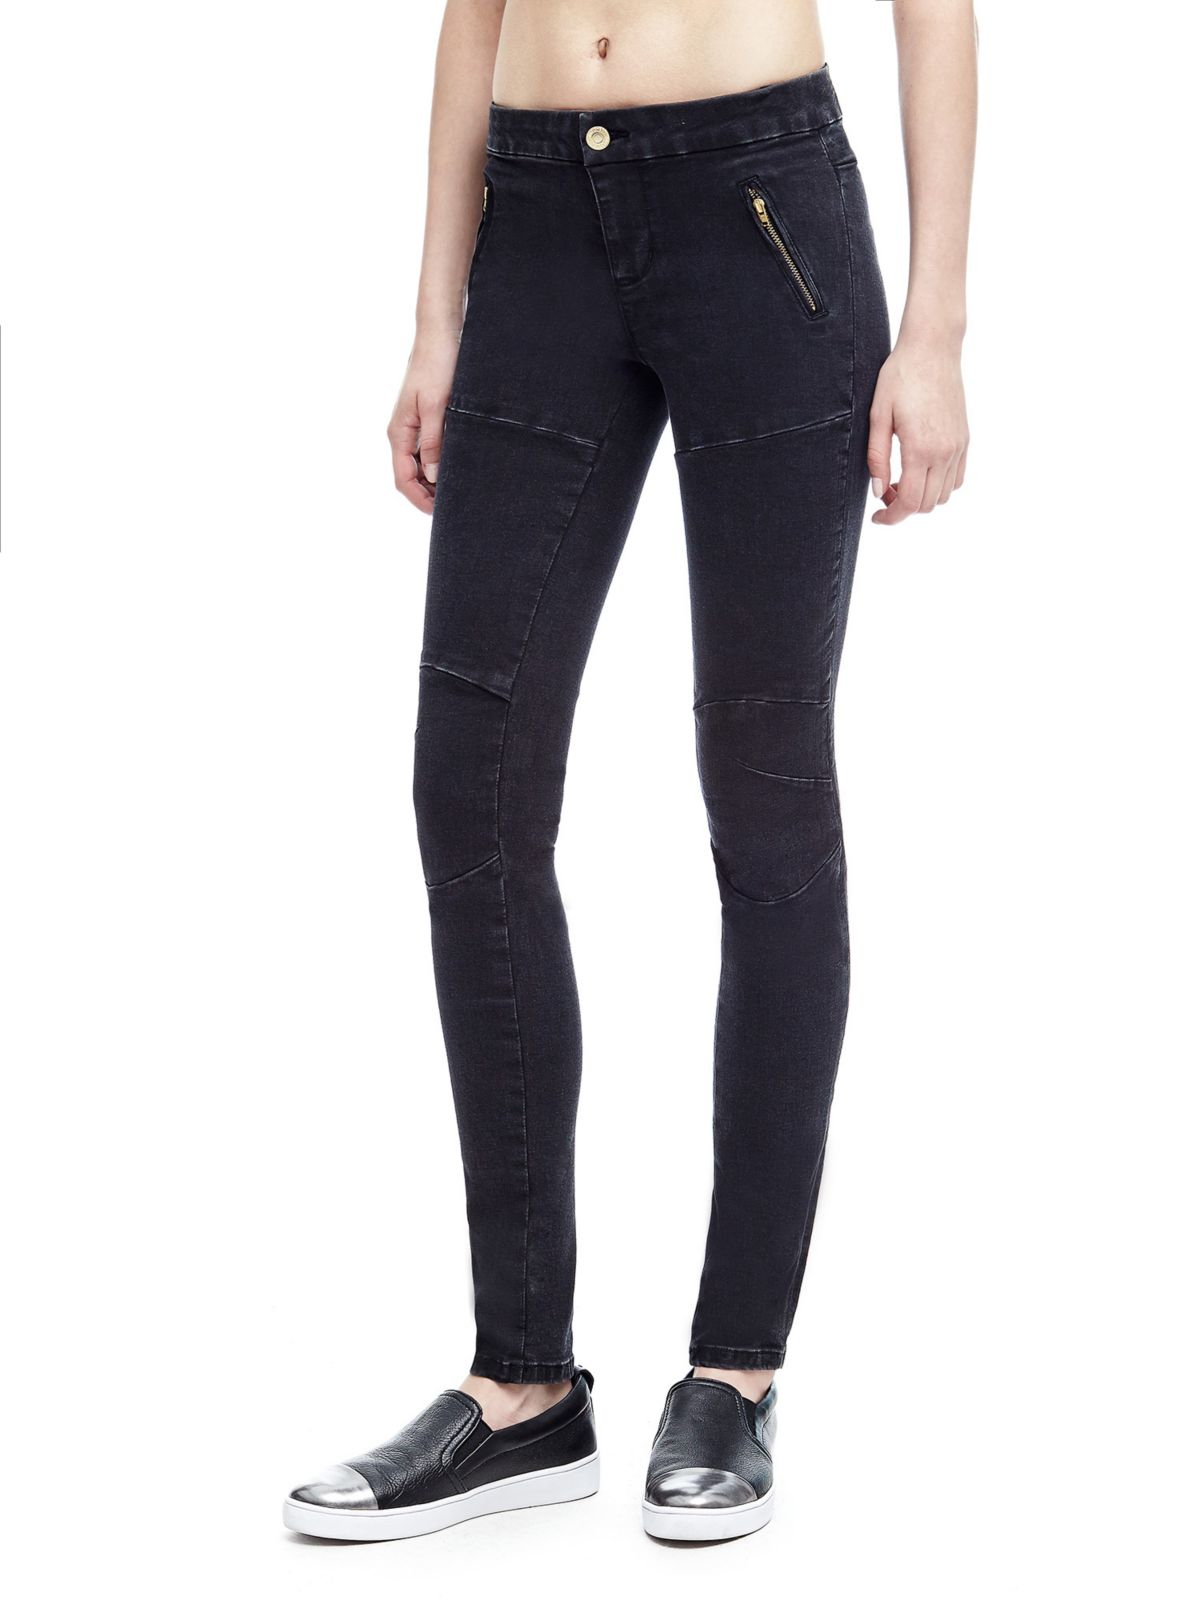 Guess Biker-style Skinny Jeans in Black - Save 20% | Lyst